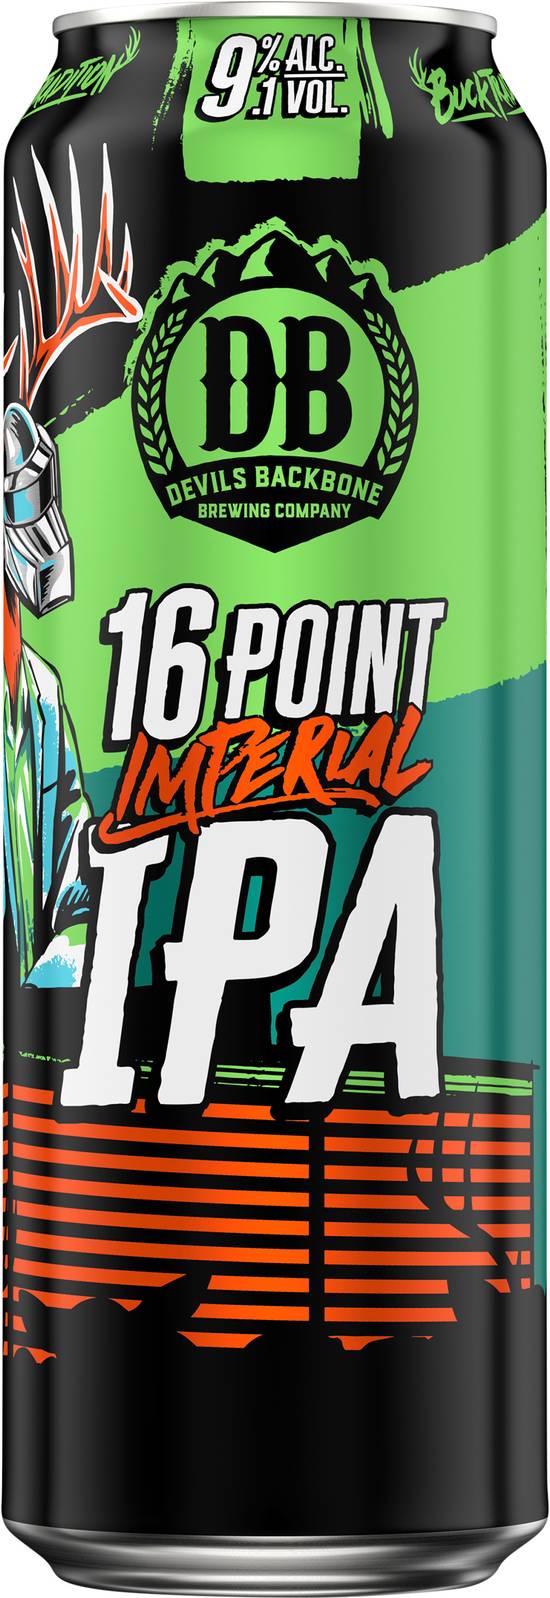 Devils Backbone Brewing Company 16 Point Imperial Ipa (19.2oz can)